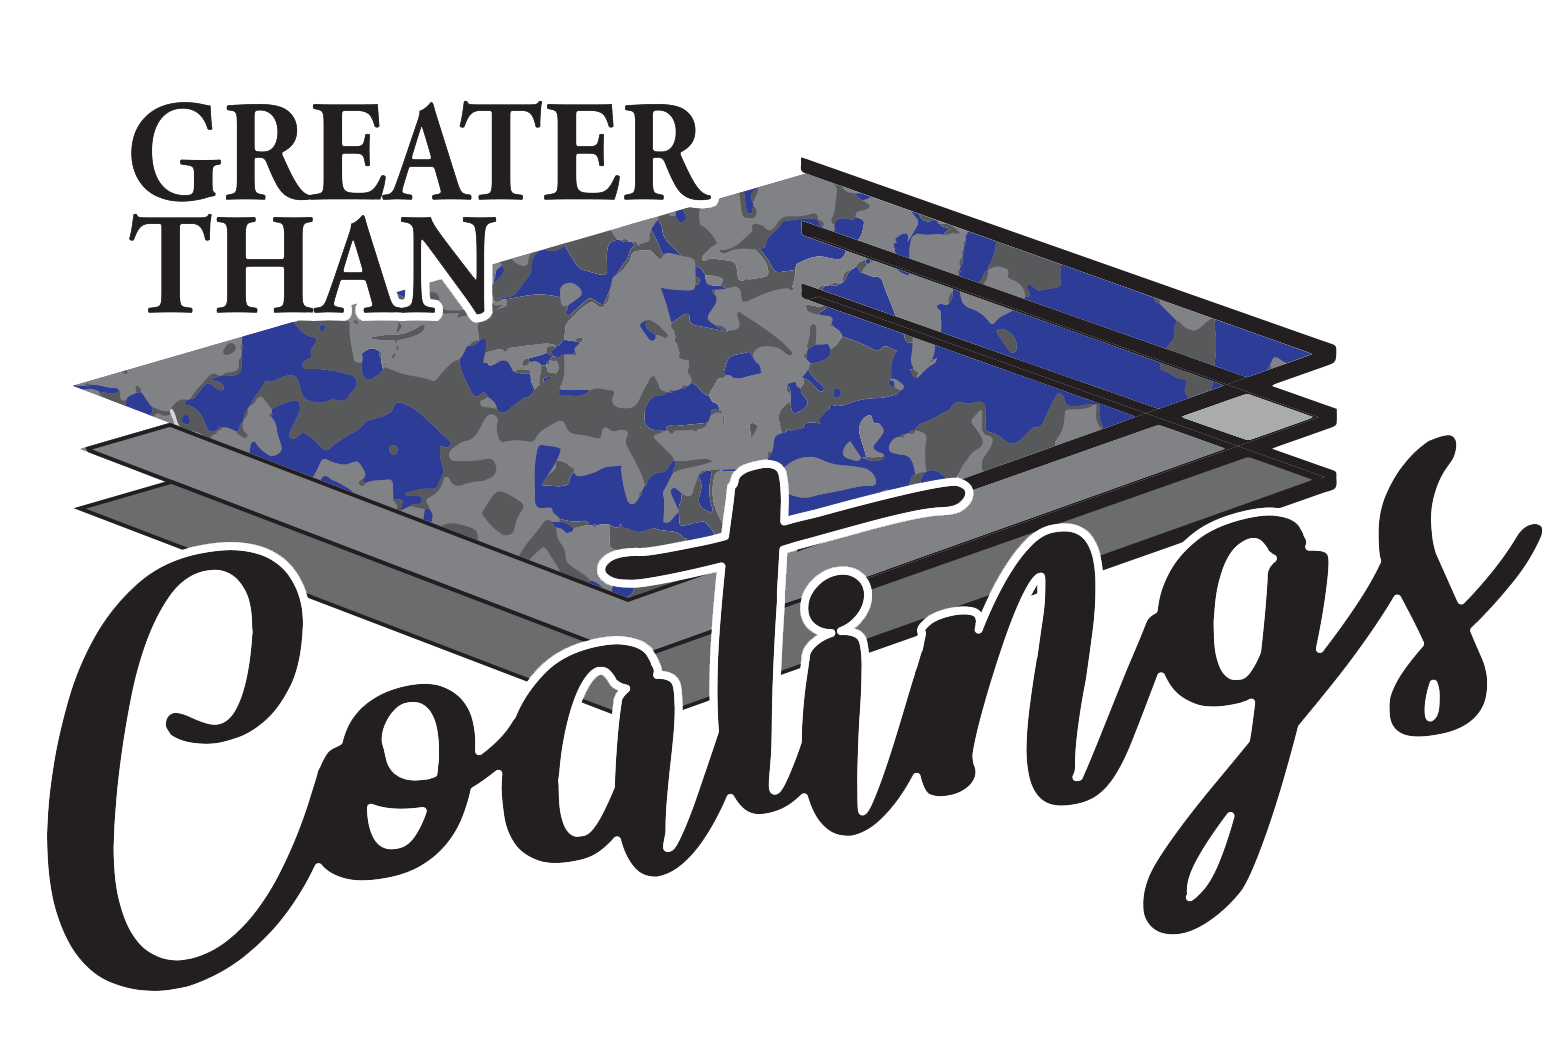 Greater Than Coatings